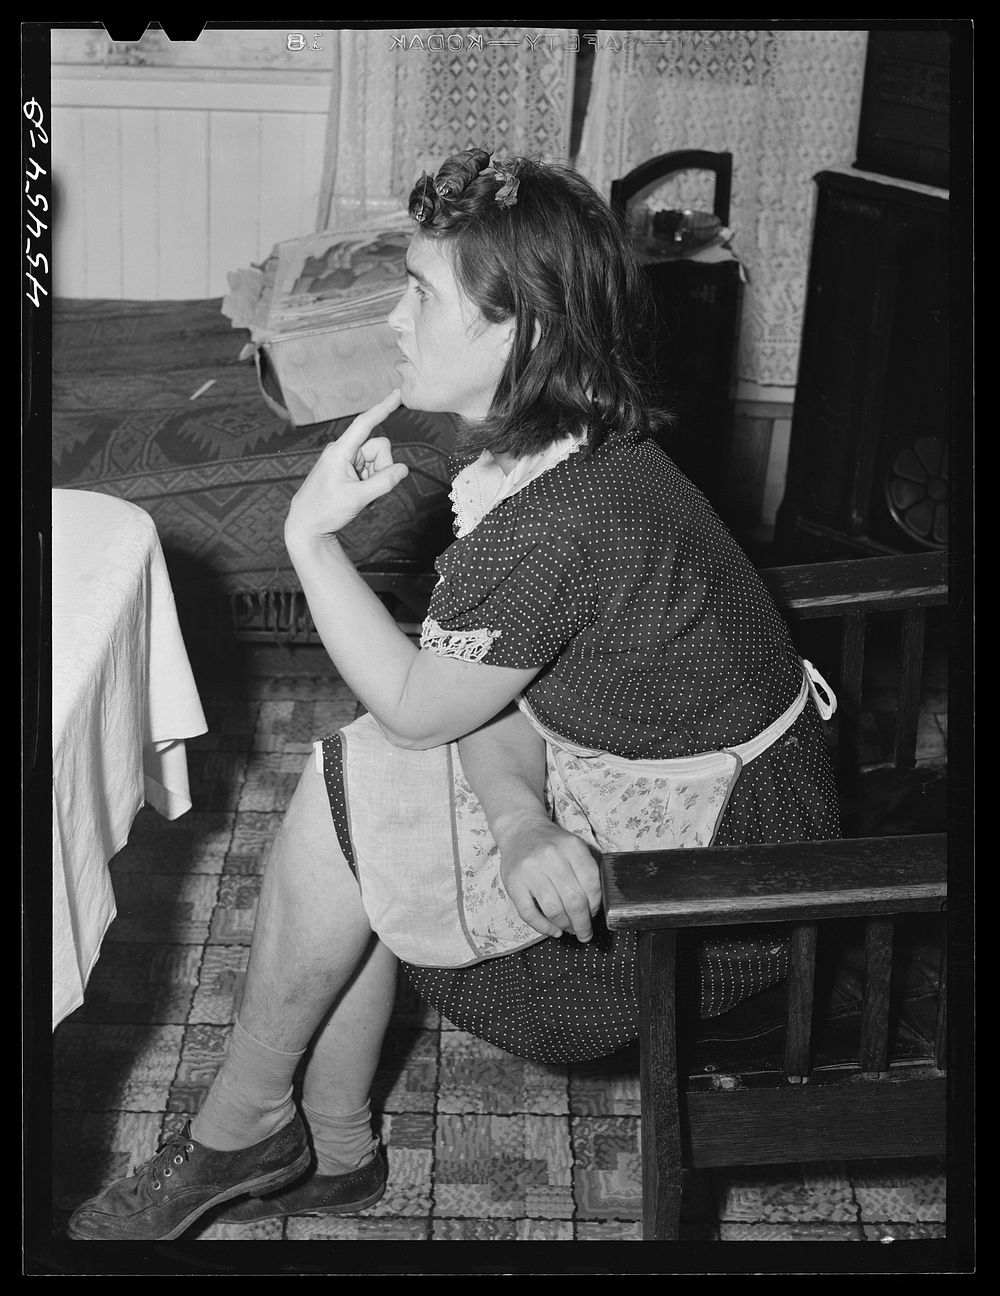 A dairy farmer's wife near Fair Haven, Vermont. Sourced from the Library of Congress.